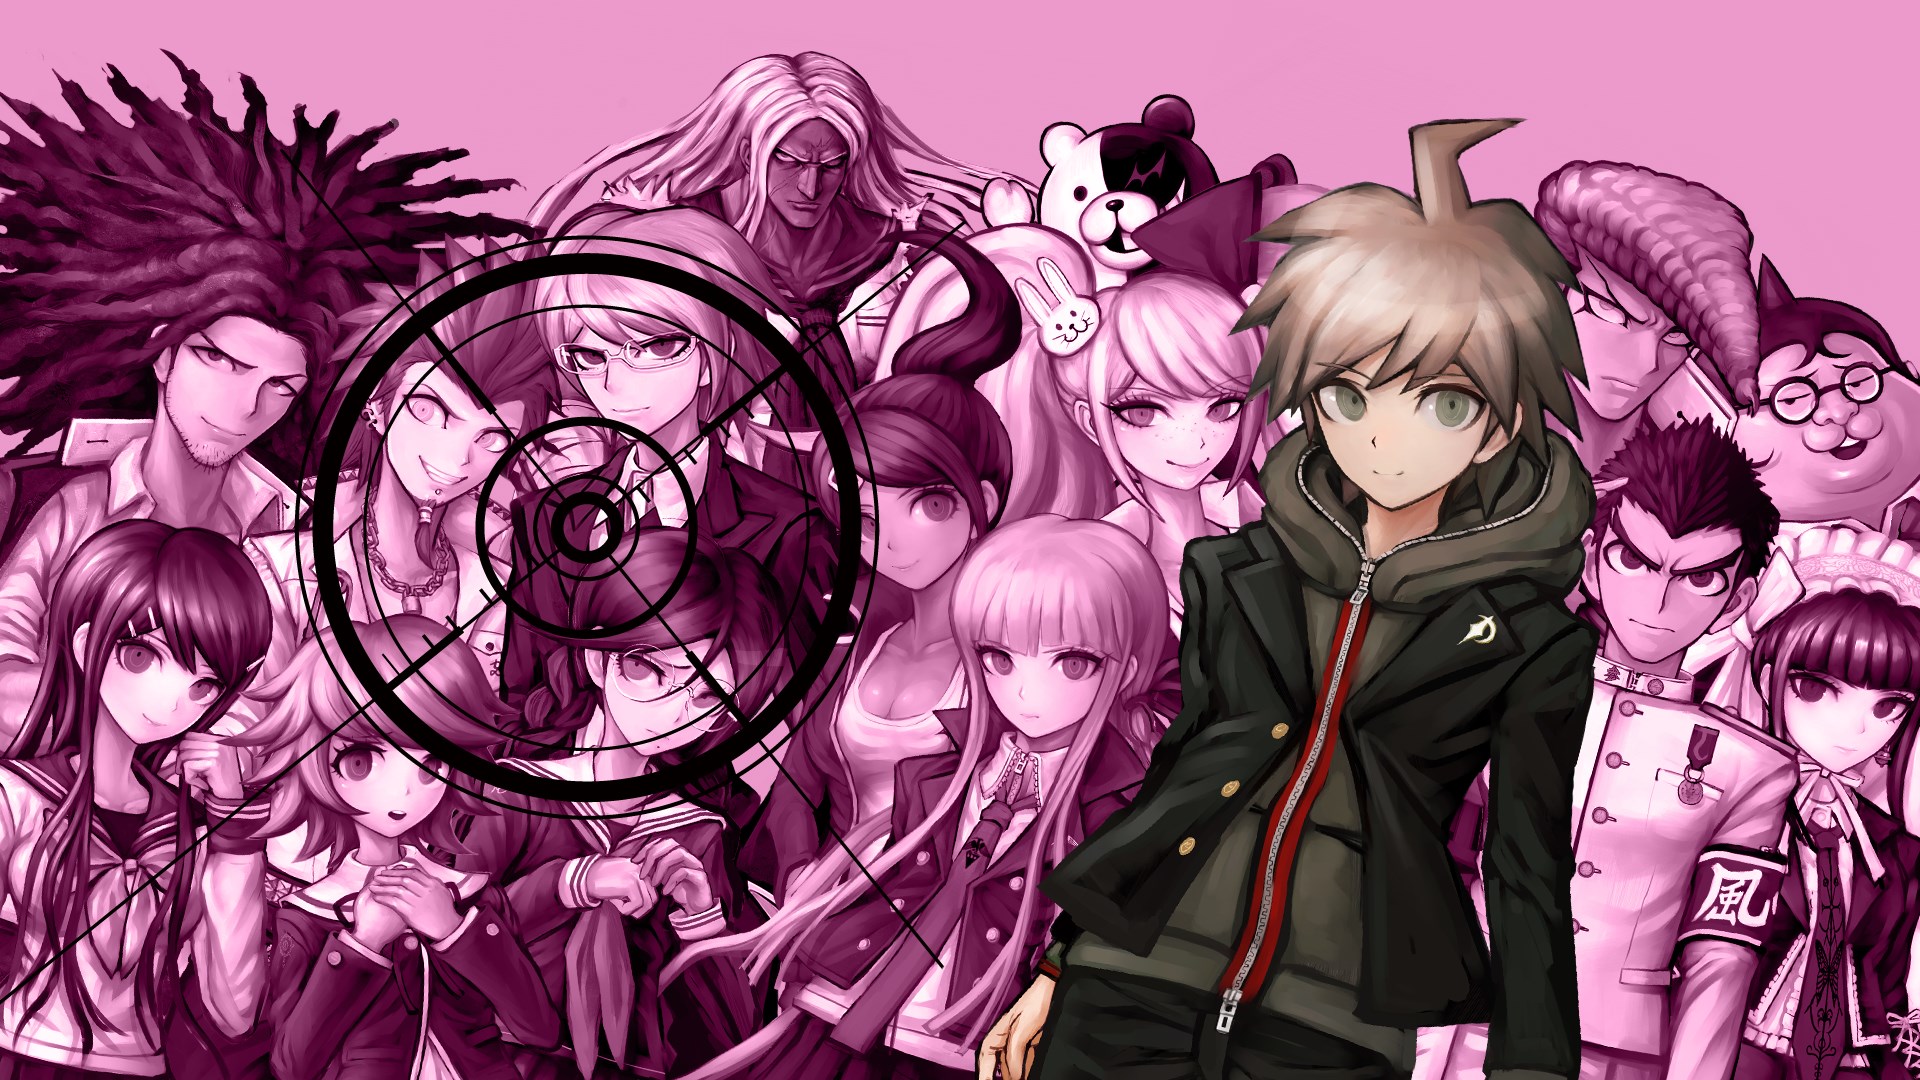 Danganronpa Anniversary Edition just got a surprise release on Xbox and